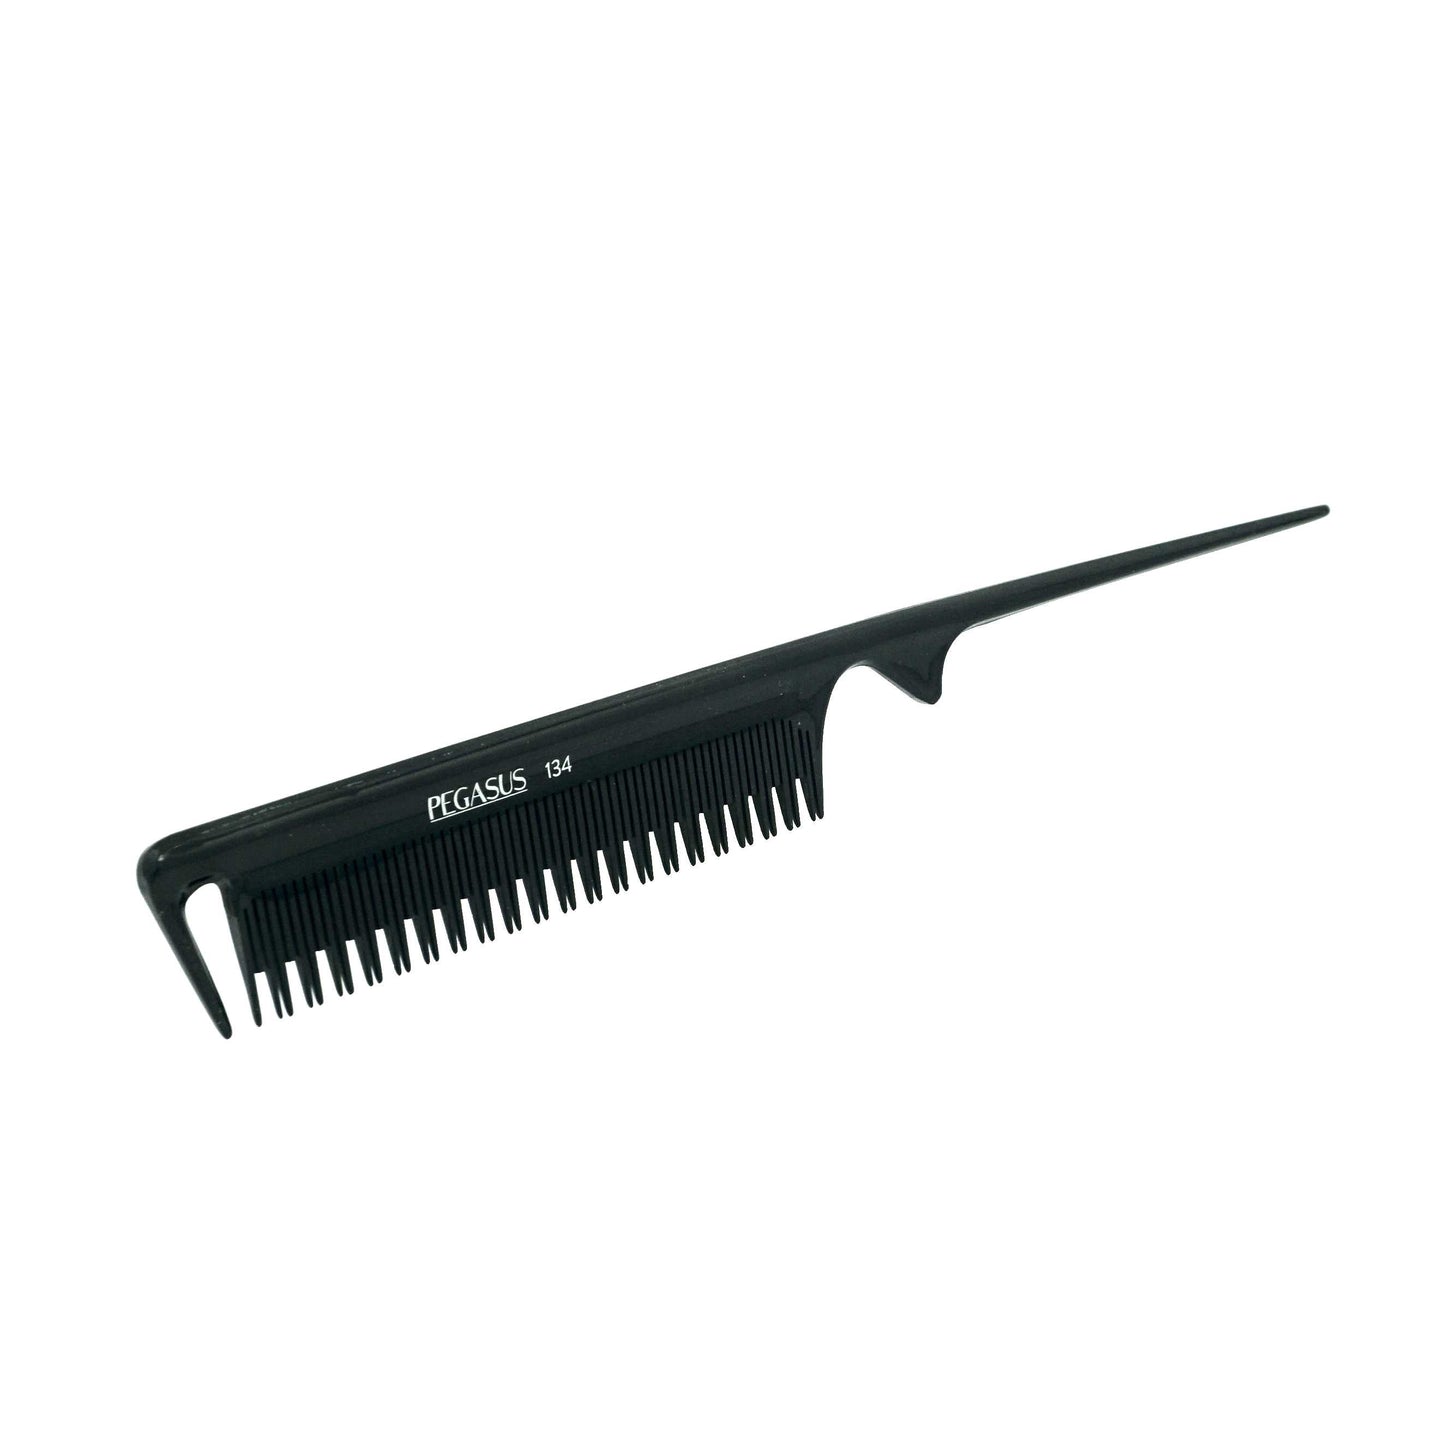 Pegasus 134, 8.5in Hard Rubber Rat Tail Tease Comb with Sectioning, Seamless, Smooth Edges, Anti Static, Heat and Chemically Resistant, Great for Parting, Coloring Hair | Peines de goma dura - Black